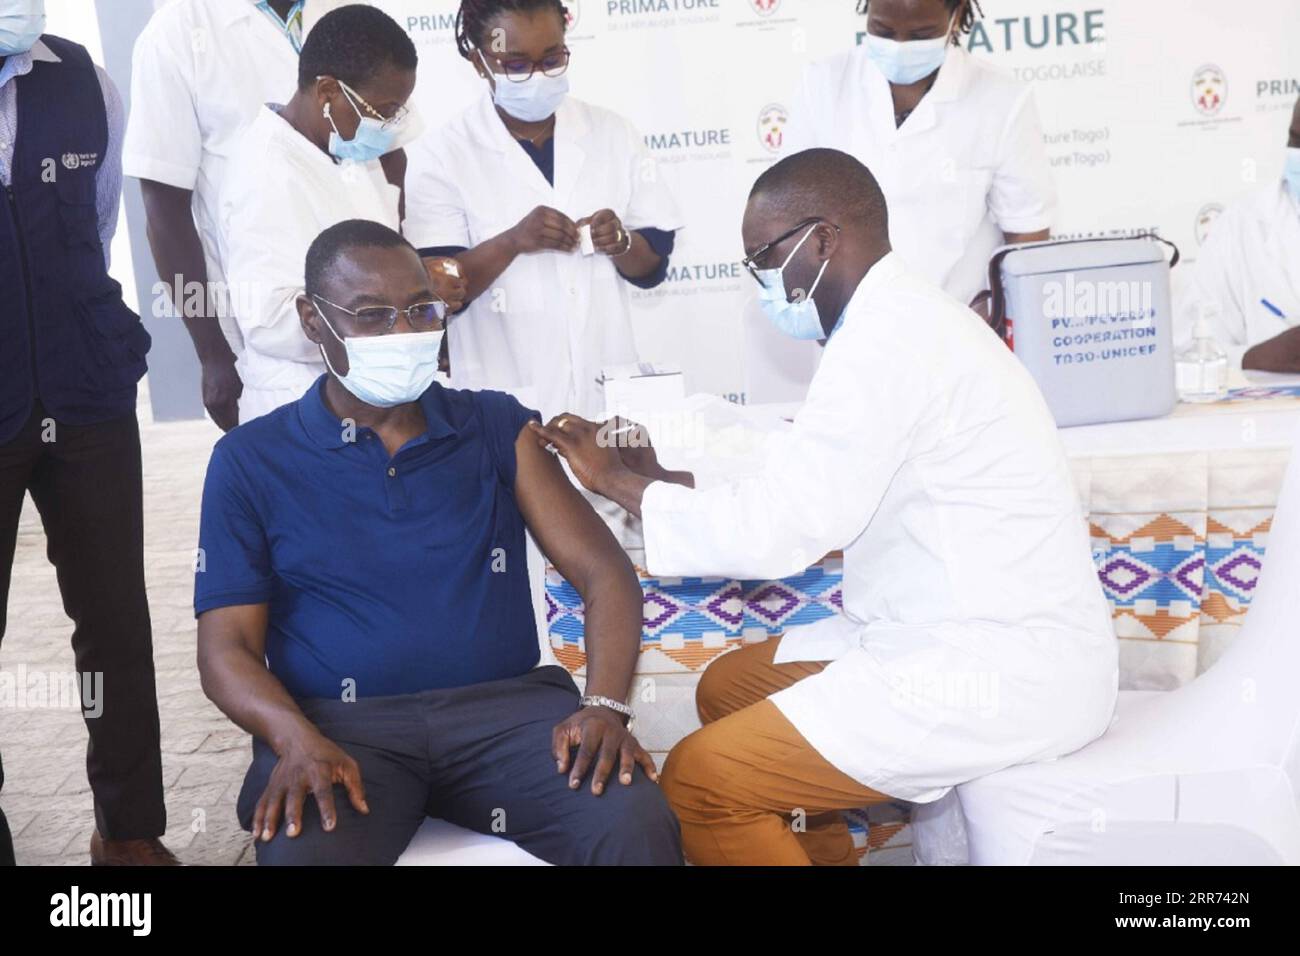 210311 -- LOME, March 11, 2021 -- Mustafa Mijiyawa, Togolese minister of Health, receives his first injection of AstraZeneca vaccine, in Lome, Togo, March 10, 2021. The nationwide immunization started Thursday, which targeted health personnel and people over 50 years, in the capital Lome and its outskirts considered the hardest hit by the pandemic. Photo by /Xinhua TOGO-LOME-COVID-19-VACCINE VictorxKelenga PUBLICATIONxNOTxINxCHN Stock Photo